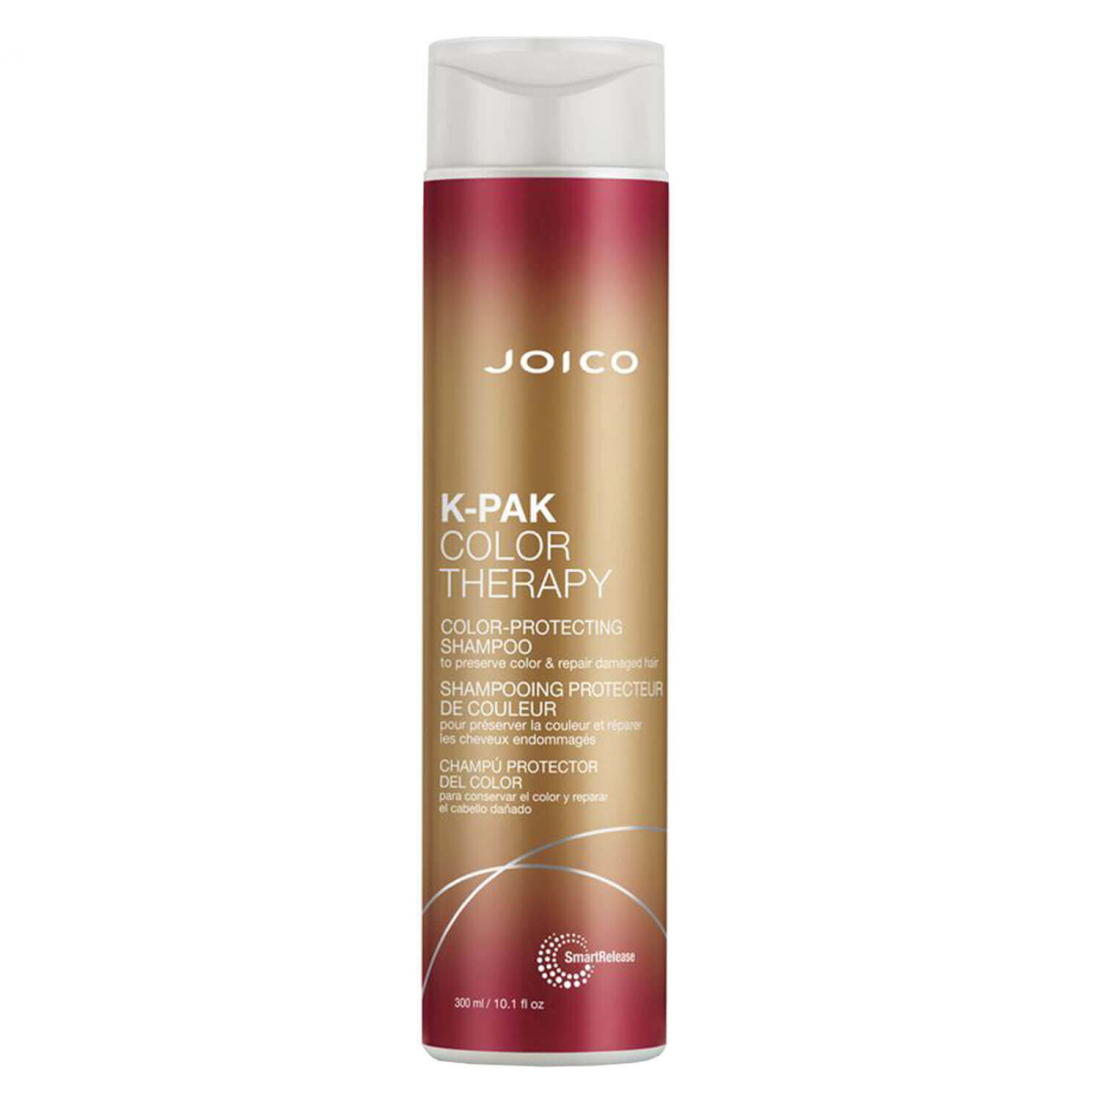 'K-Pak Color Therapy Color Protecting' Shampoo - 300 ml